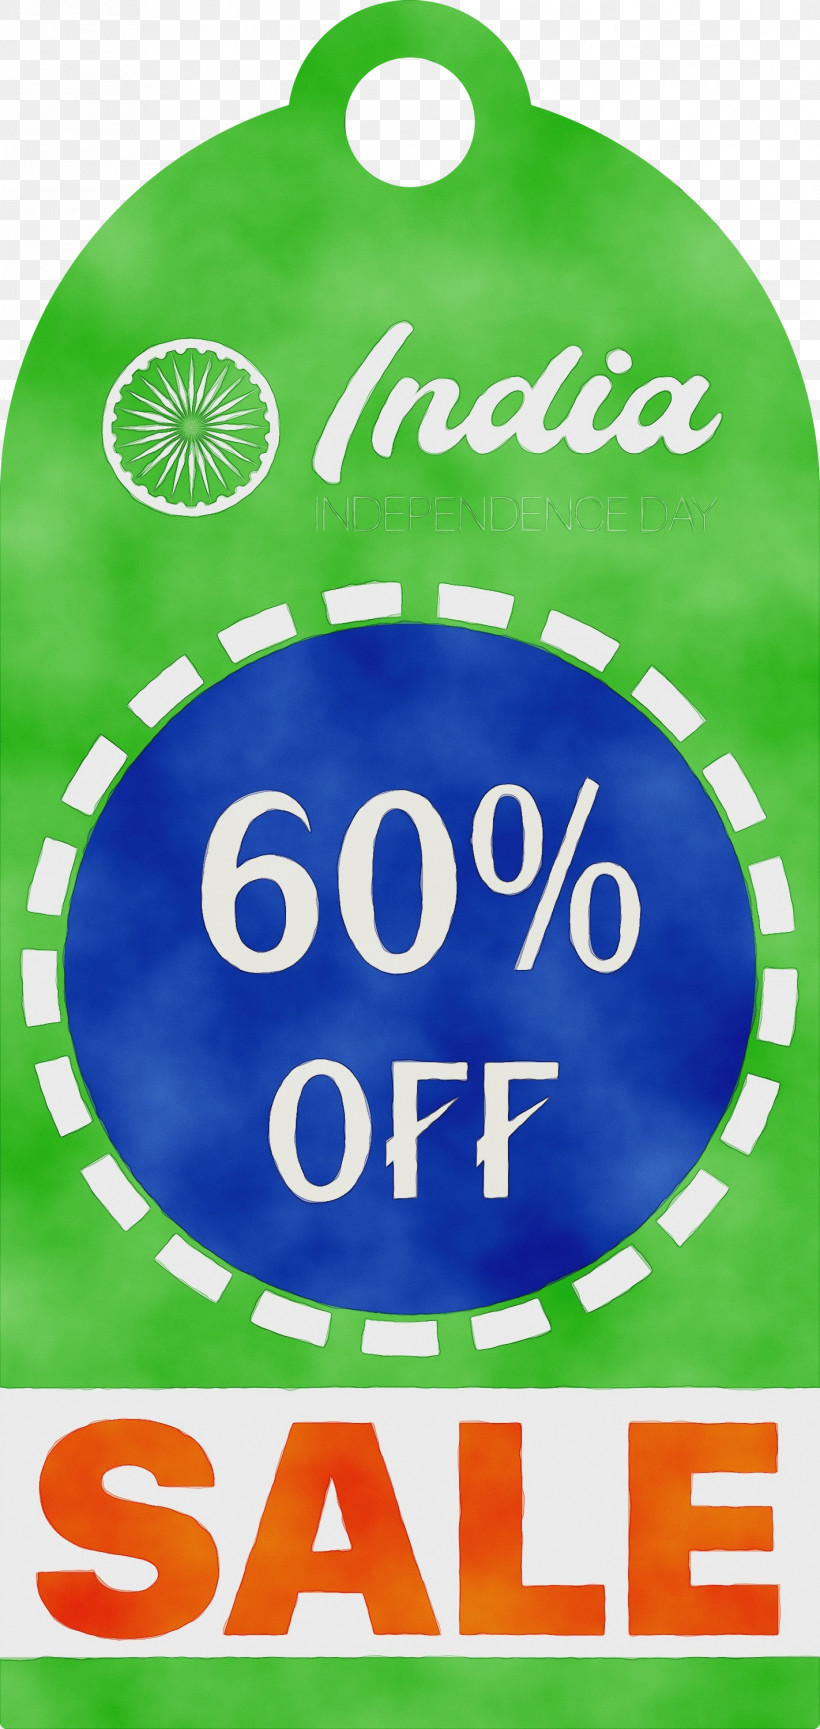 Indian Army, PNG, 1422x3000px, India Indenpendence Day Sale Tag, Green, India, India Indenpendence Day Sale Label, Indian Army Download Free